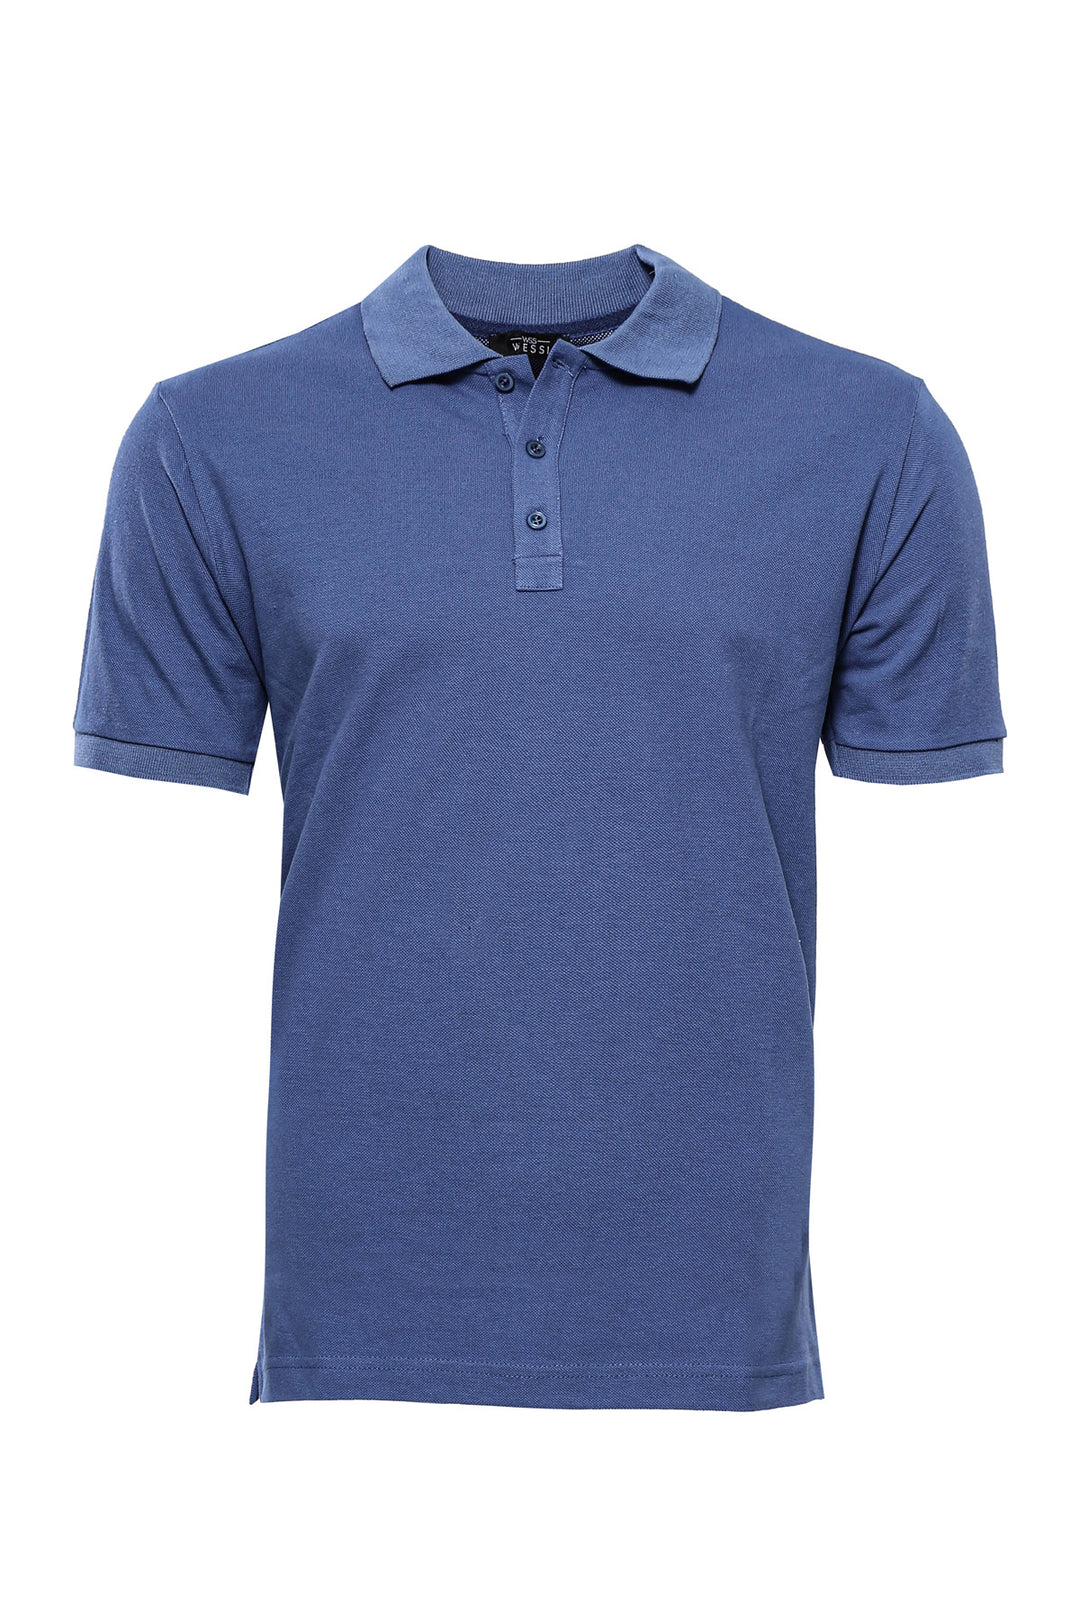 Oxford Blue Polo Collar T-shirt - Wessi